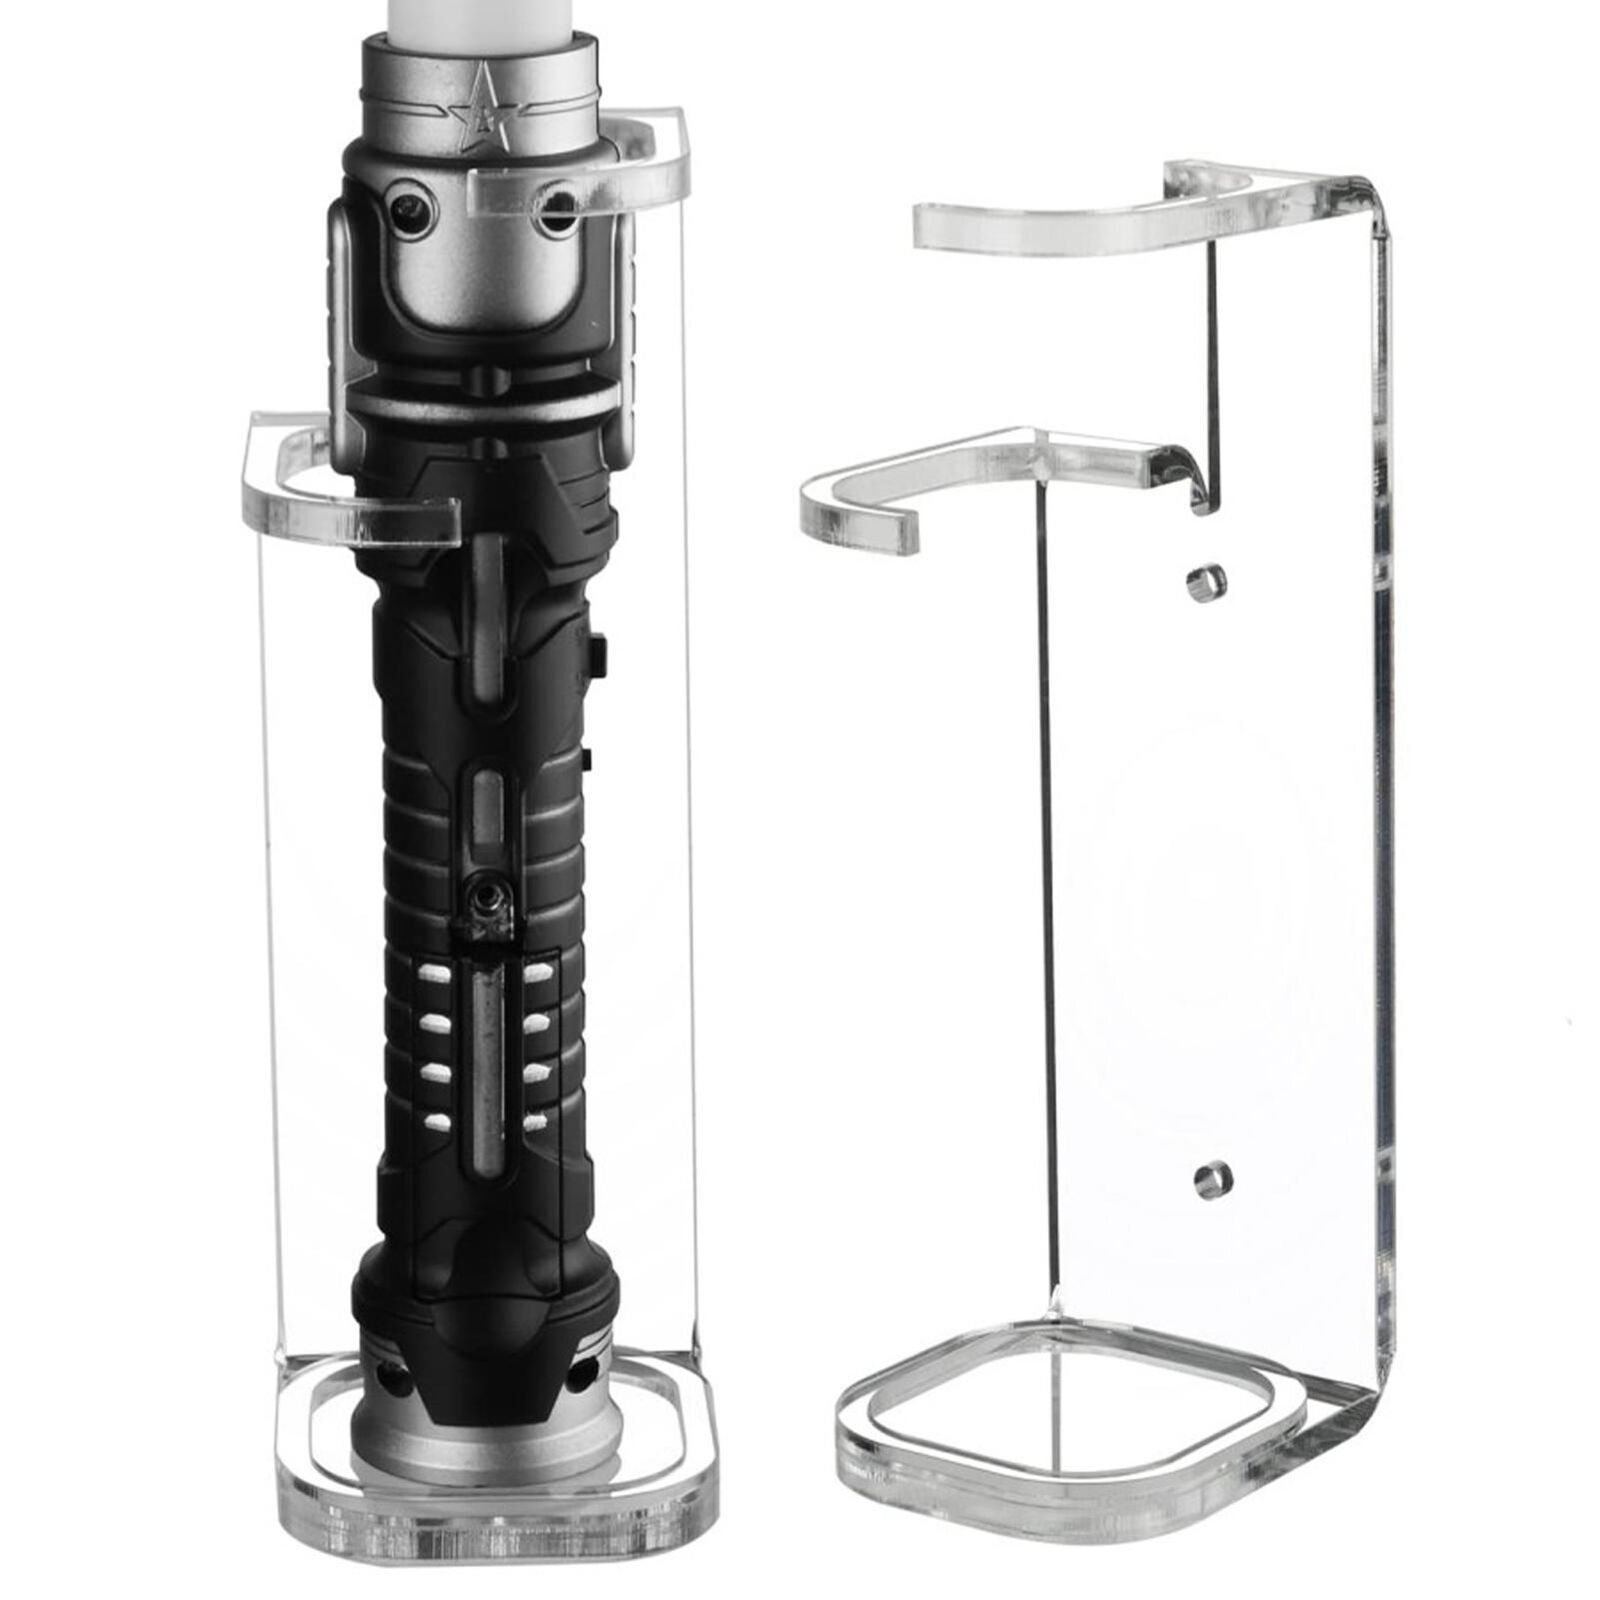 Acrylic Lightsaber Wall Mount        Stand Holder Decorative        Display Rack